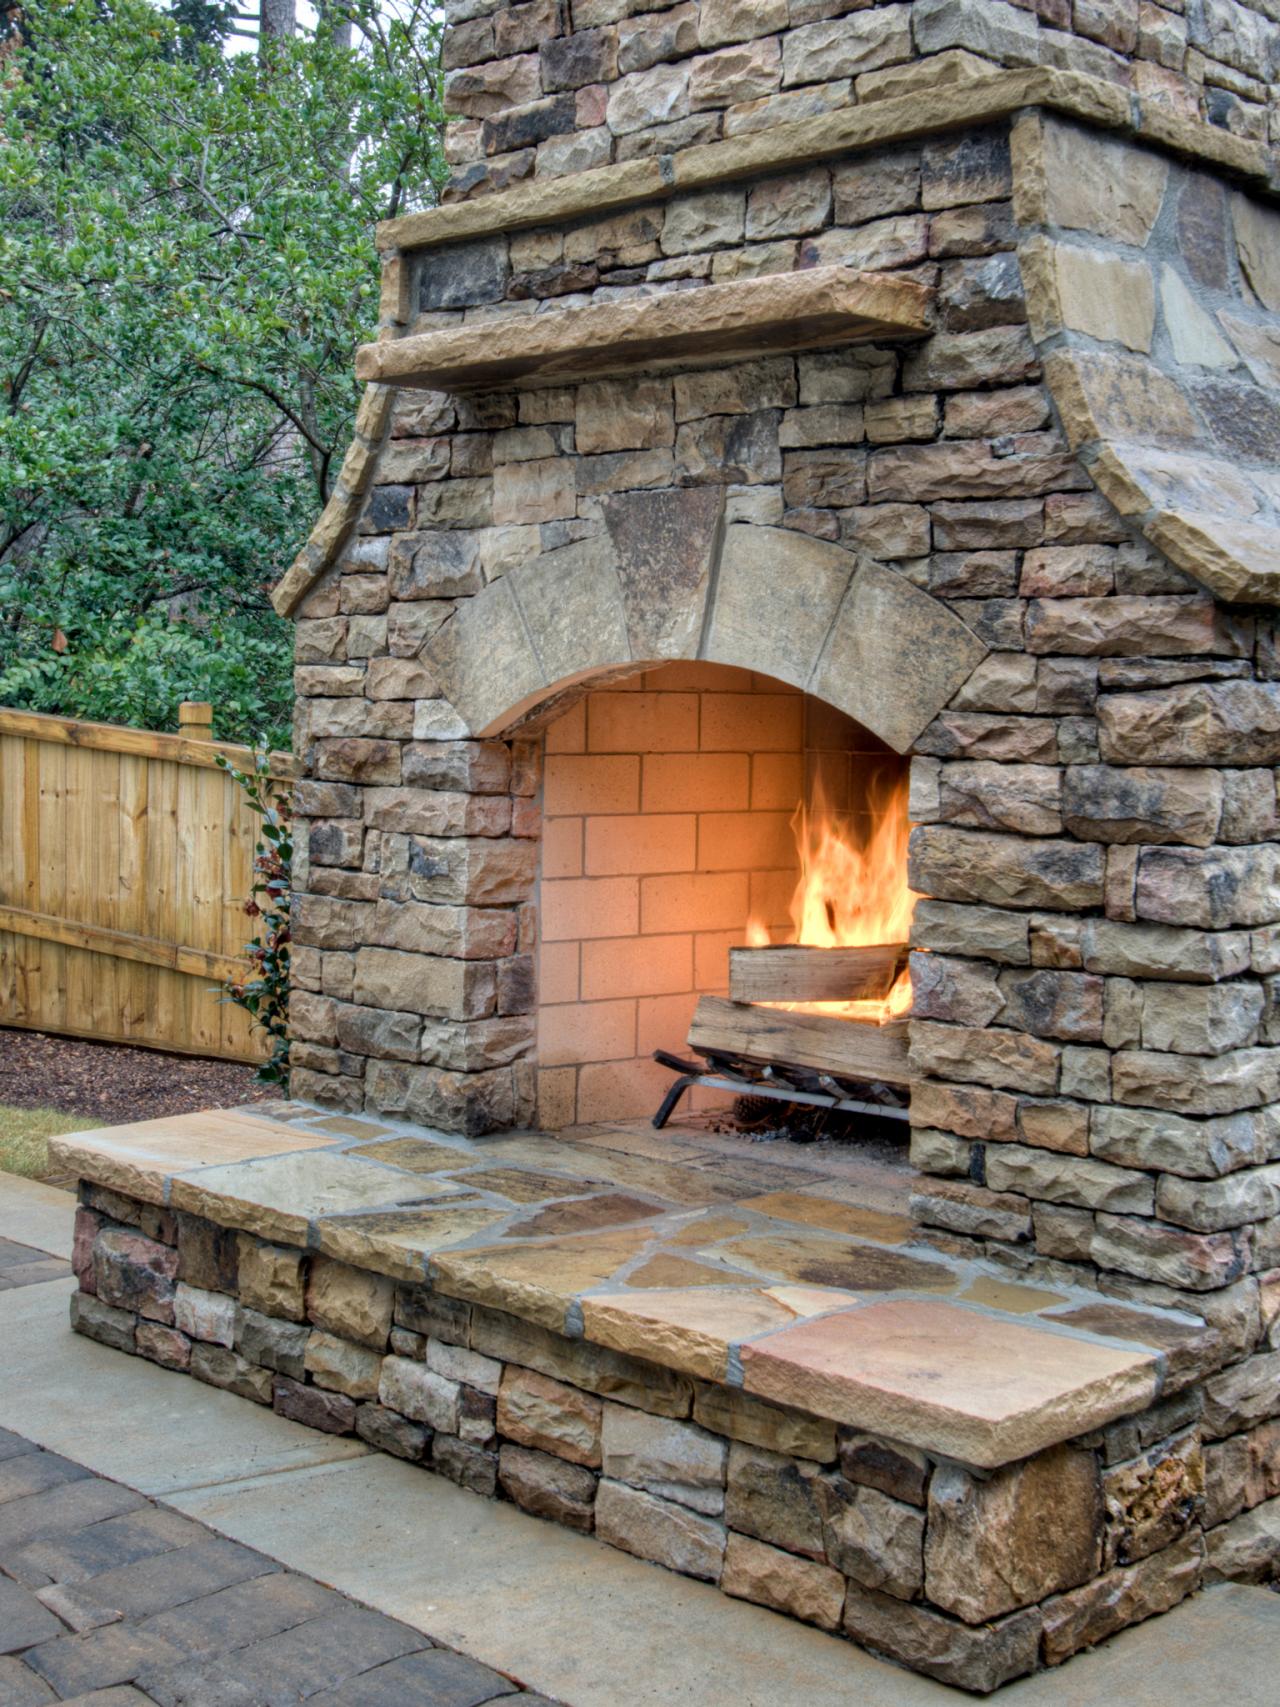 Gather info on how to build an outdoor fireplace